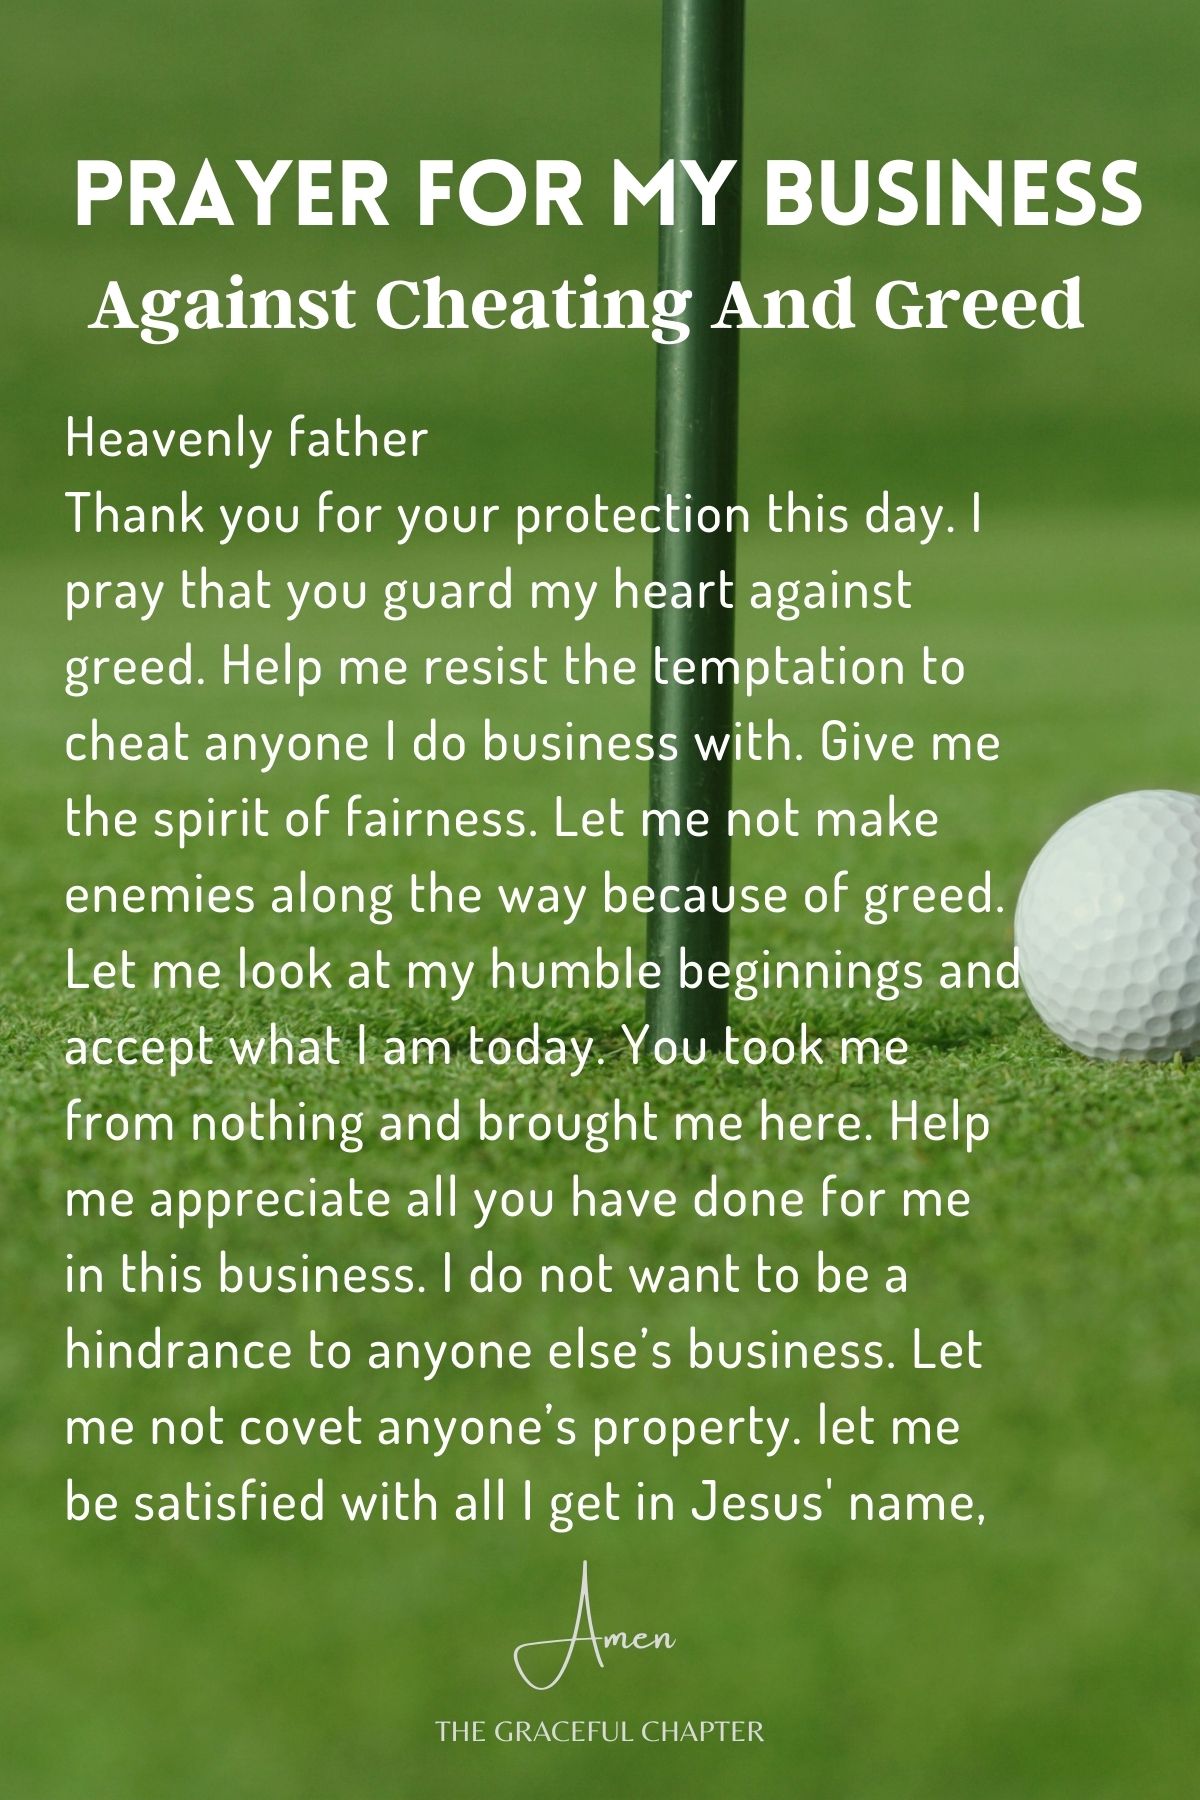 Prayer against cheating and greed in business